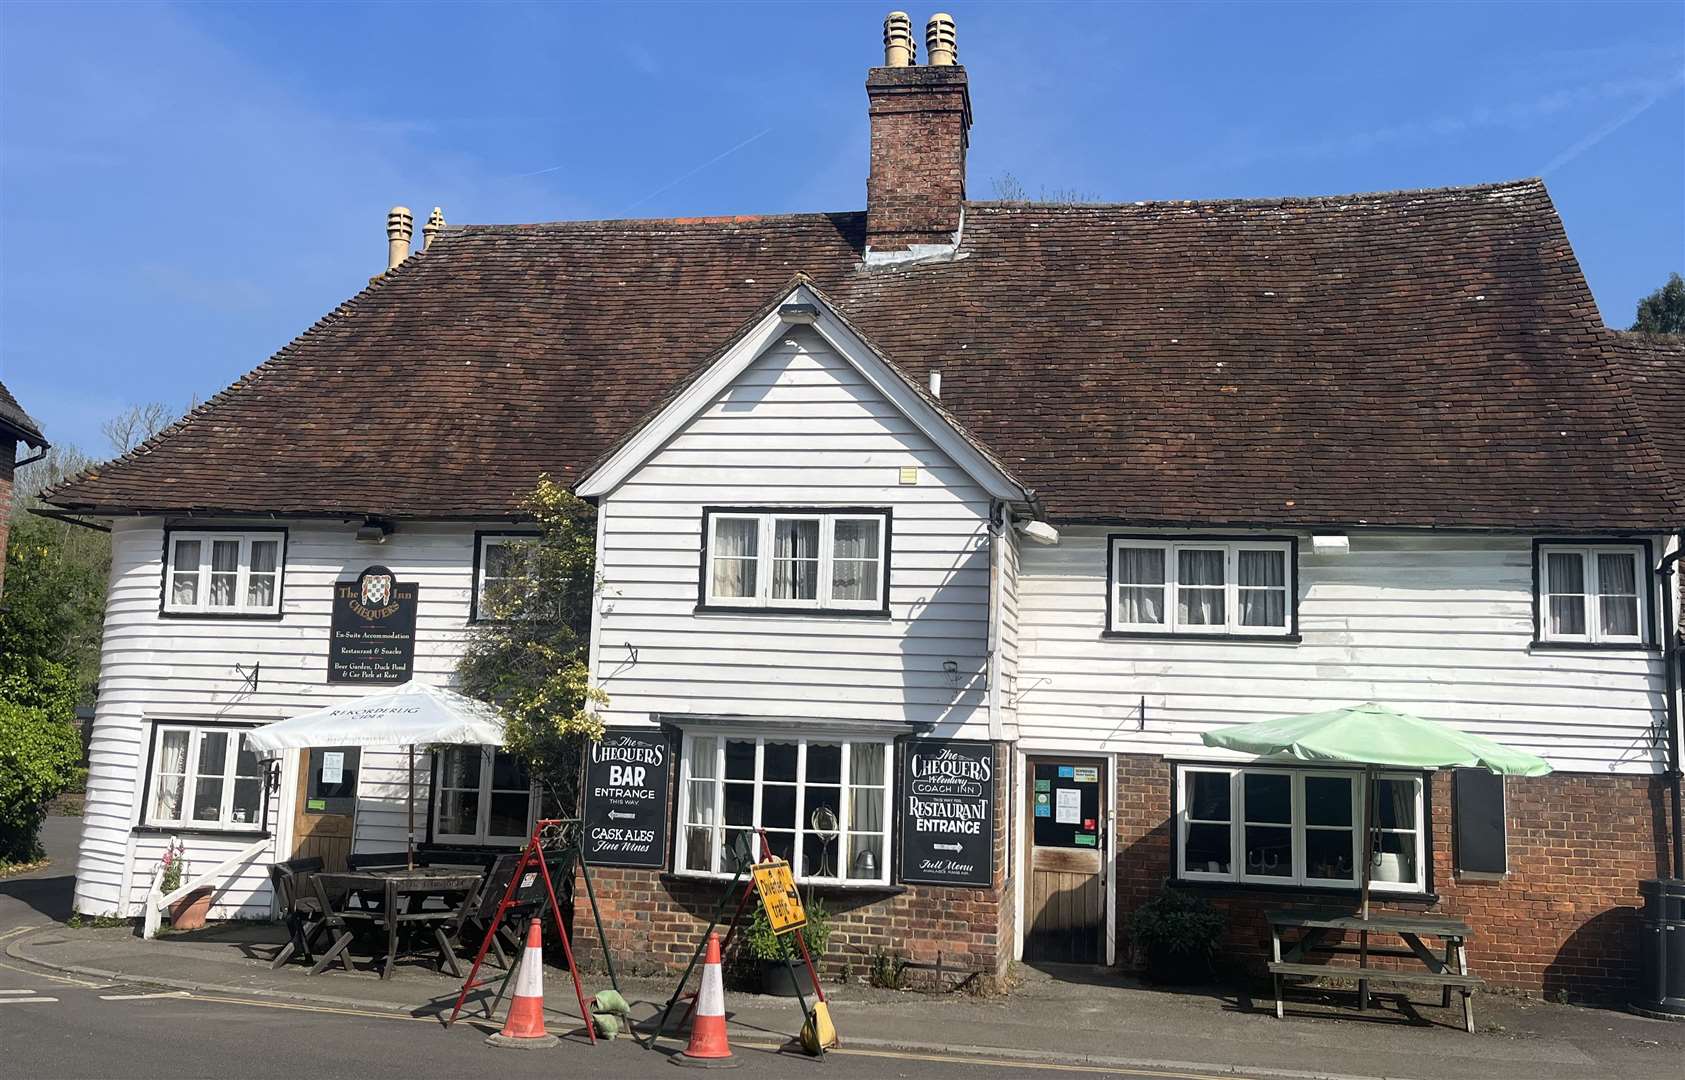 The owners of The Chequers Inn in Smarden, near Ashford, have submitted plans to convert the pub into a single-dwelling house